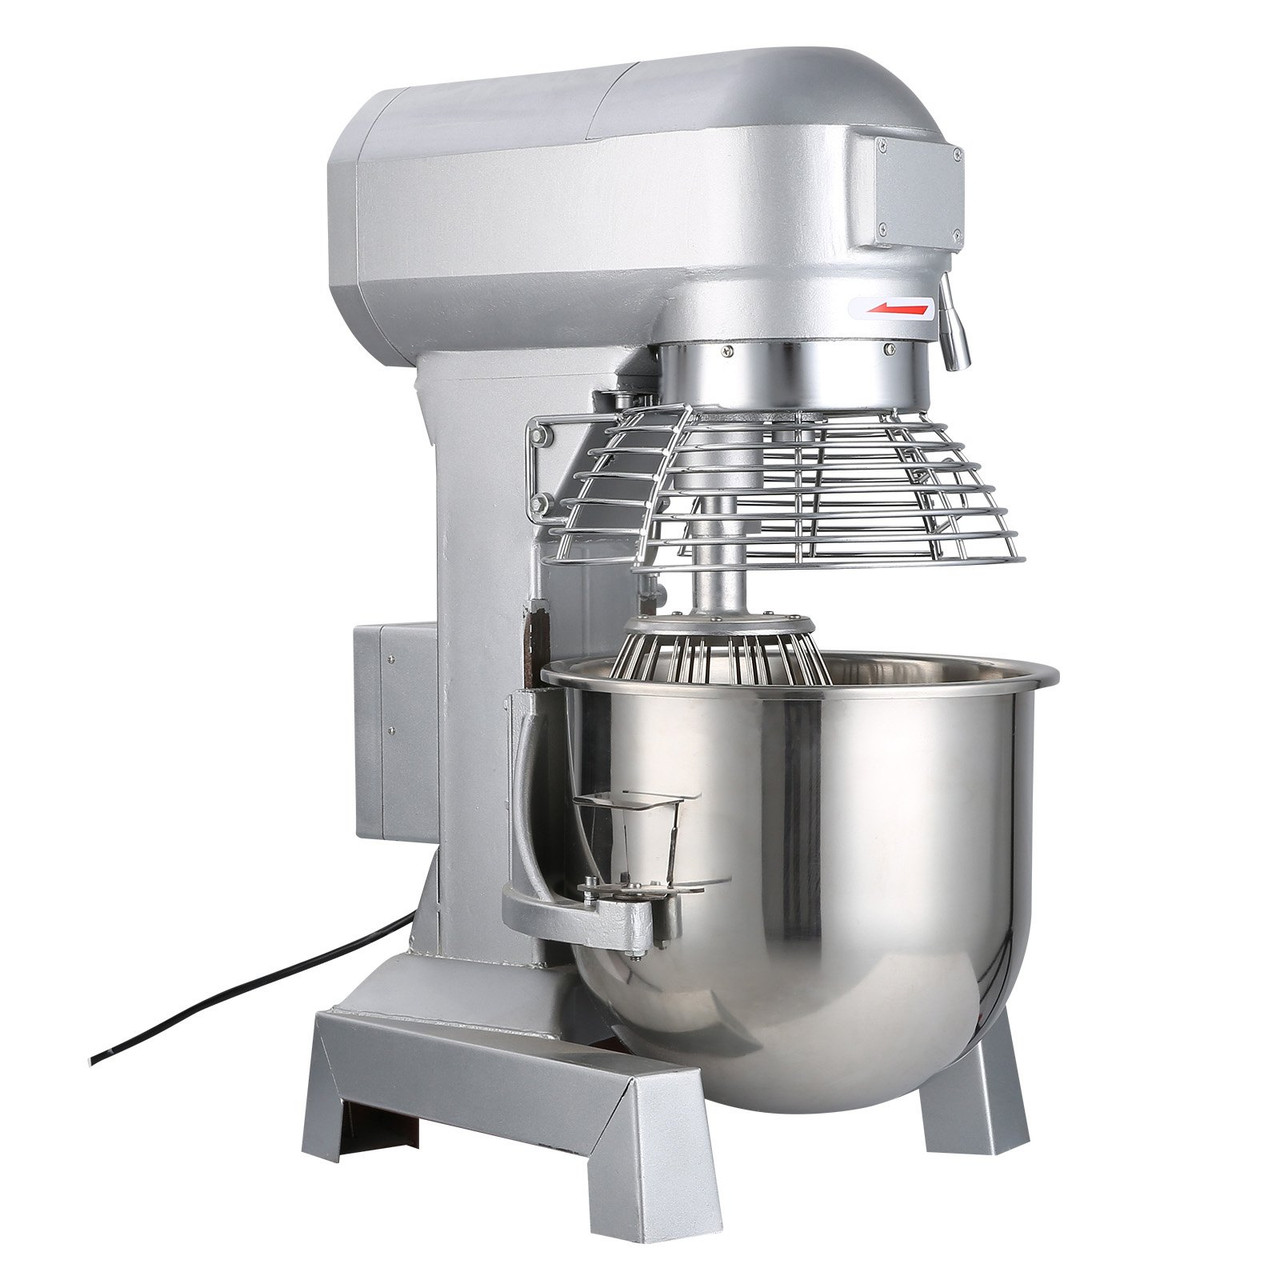 VEVOR Commercial Food Mixer 30Qt 1100W 3 Speeds Adjustable 105/180/408 RPM Heavy Duty 110V with Stainless Steel Bowl Dough Hooks Whisk Beater for Schools Bakeries Restaurants Pizzerias